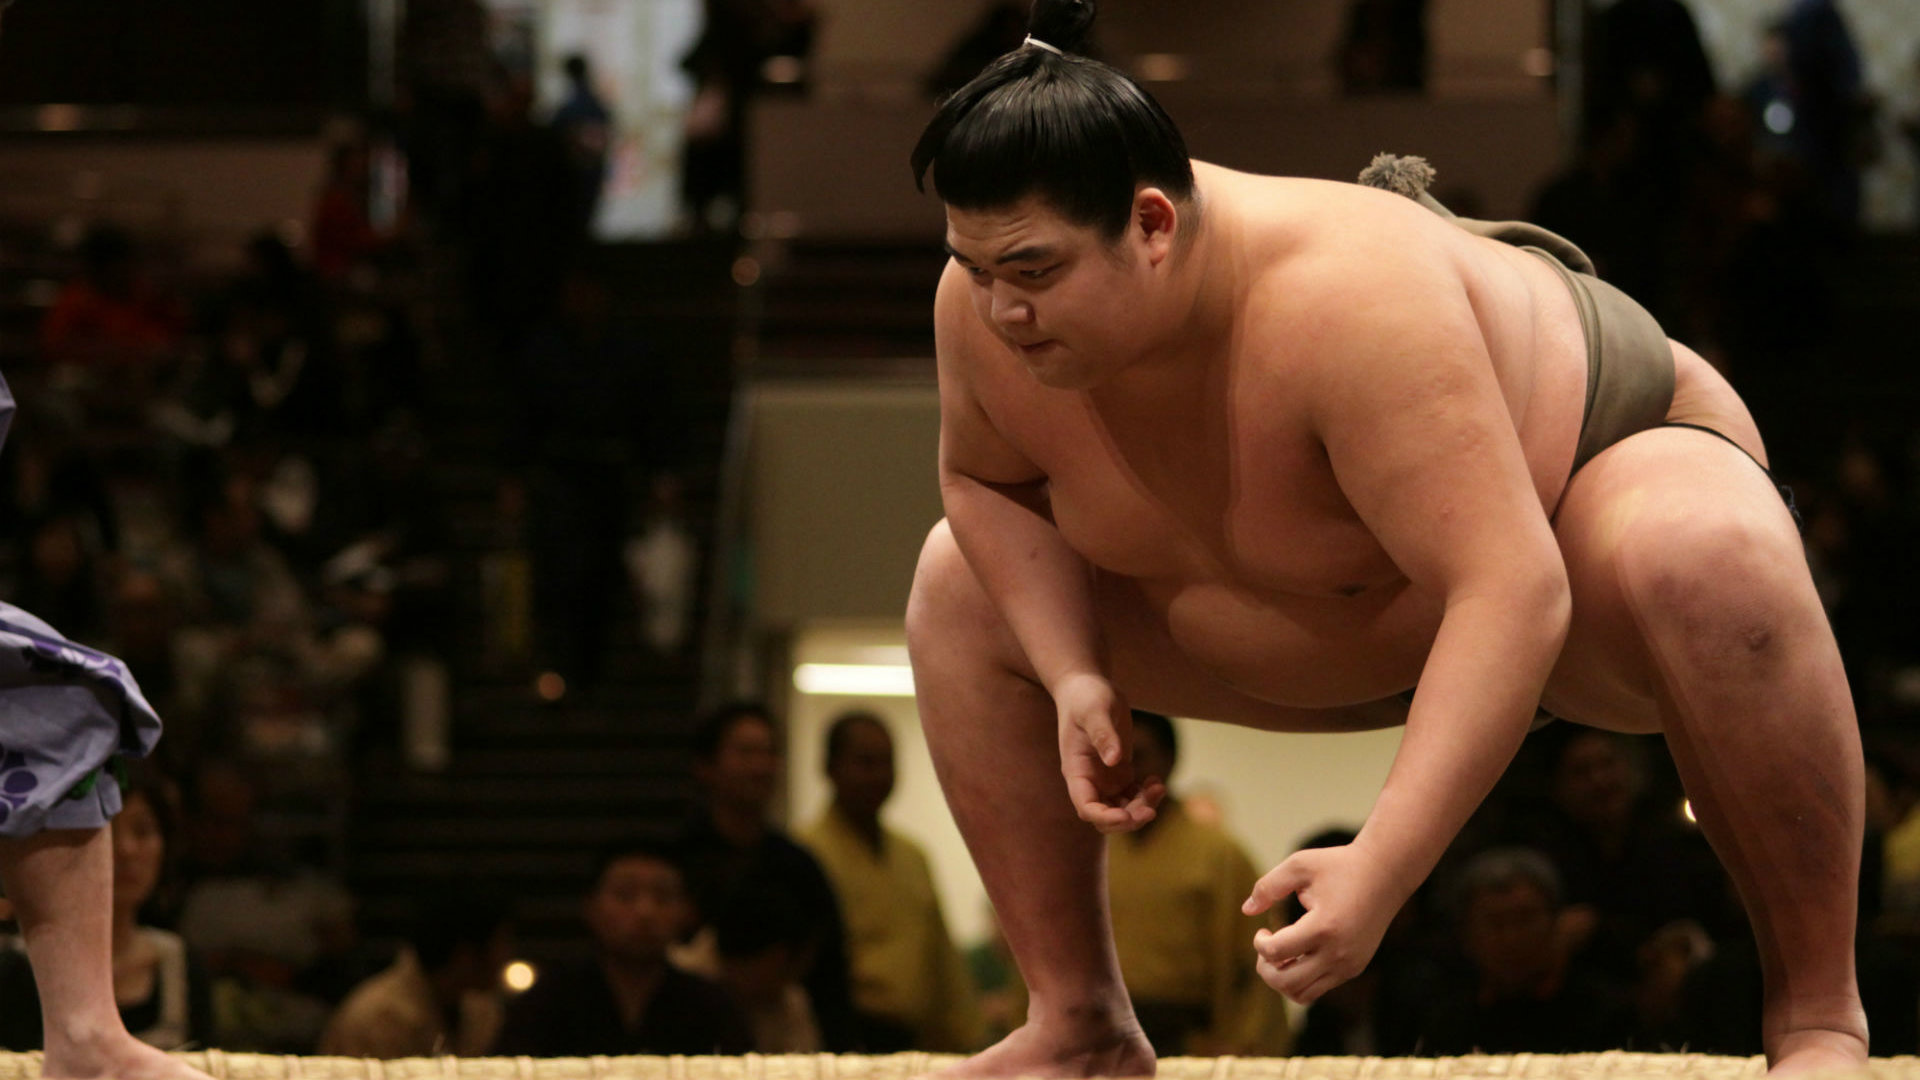 Sumo: Japanese wrestler, The Japanese form of competitive full-contact wrestling. 1920x1080 Full HD Wallpaper.